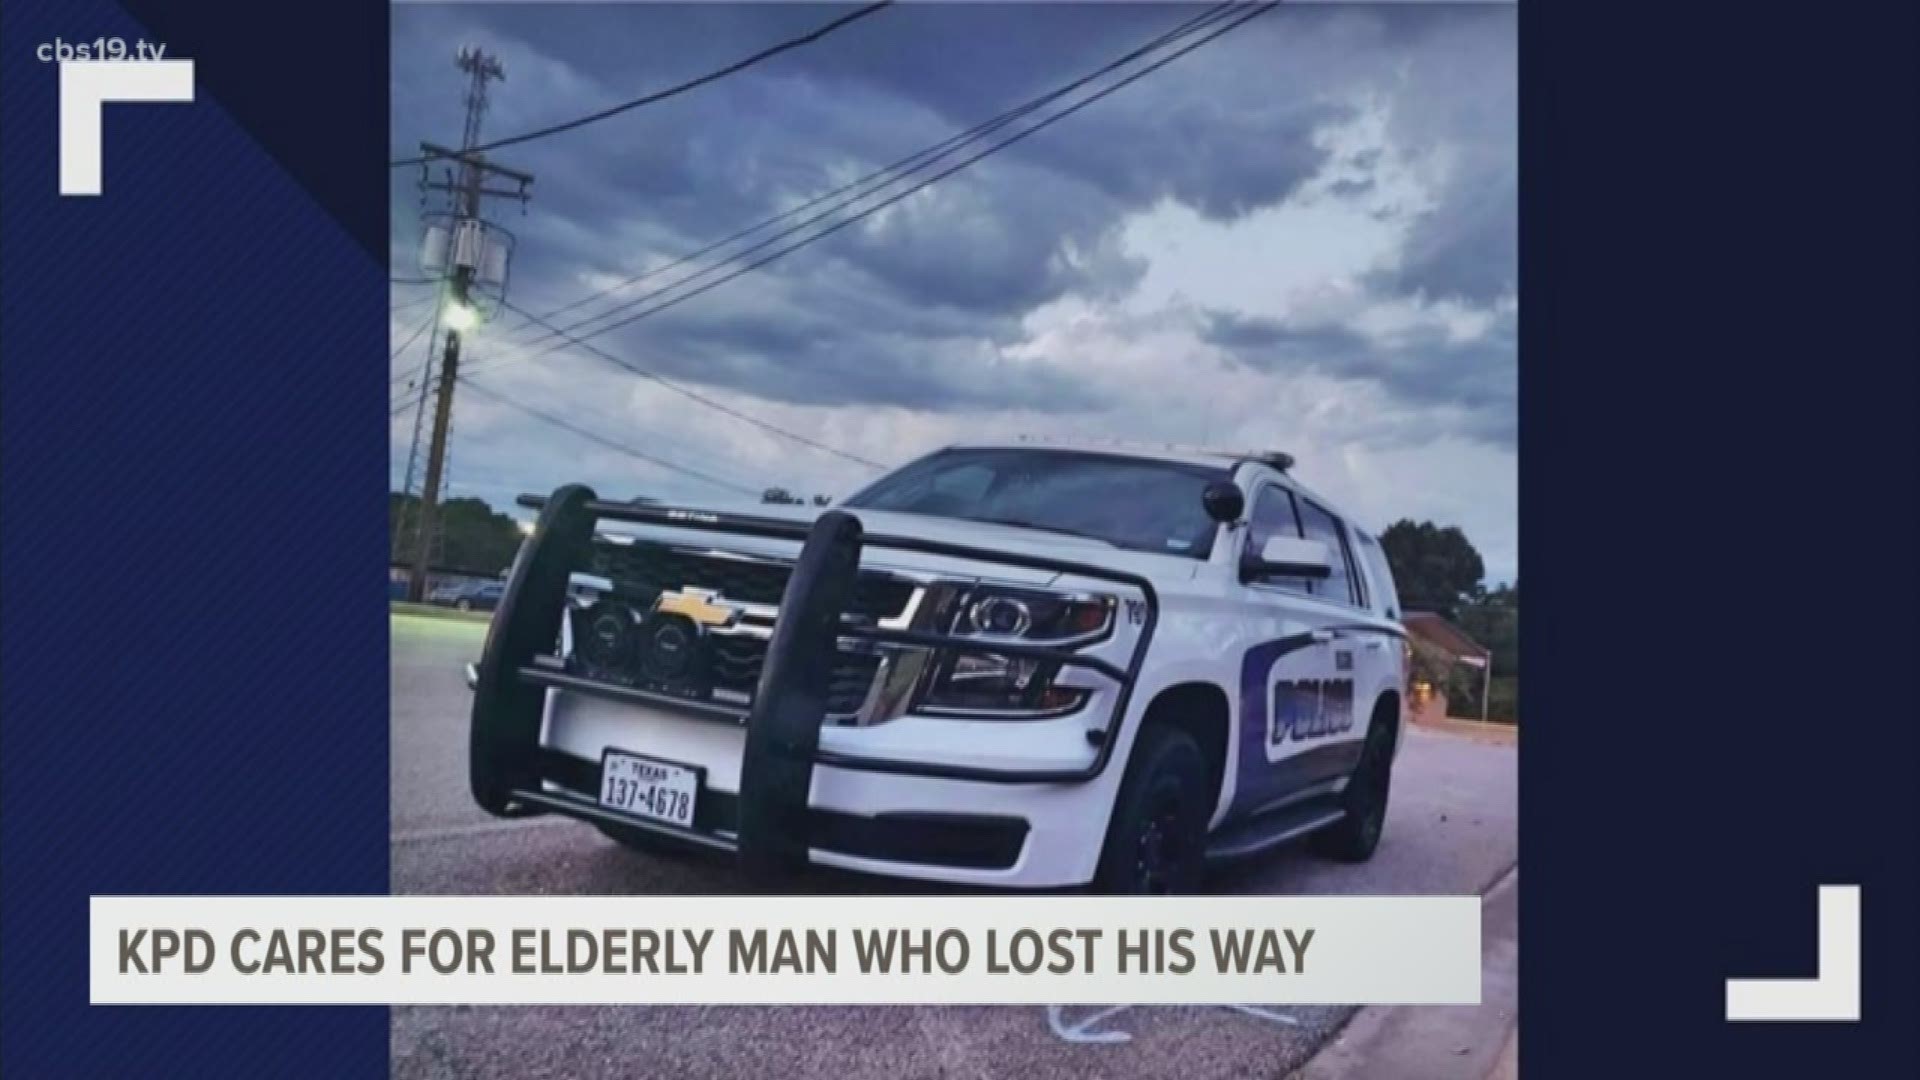 Police said the driver's diabetes caused him to become confused. He eventually drove his way to Kilgore, where officers went above and beyond to care for him.